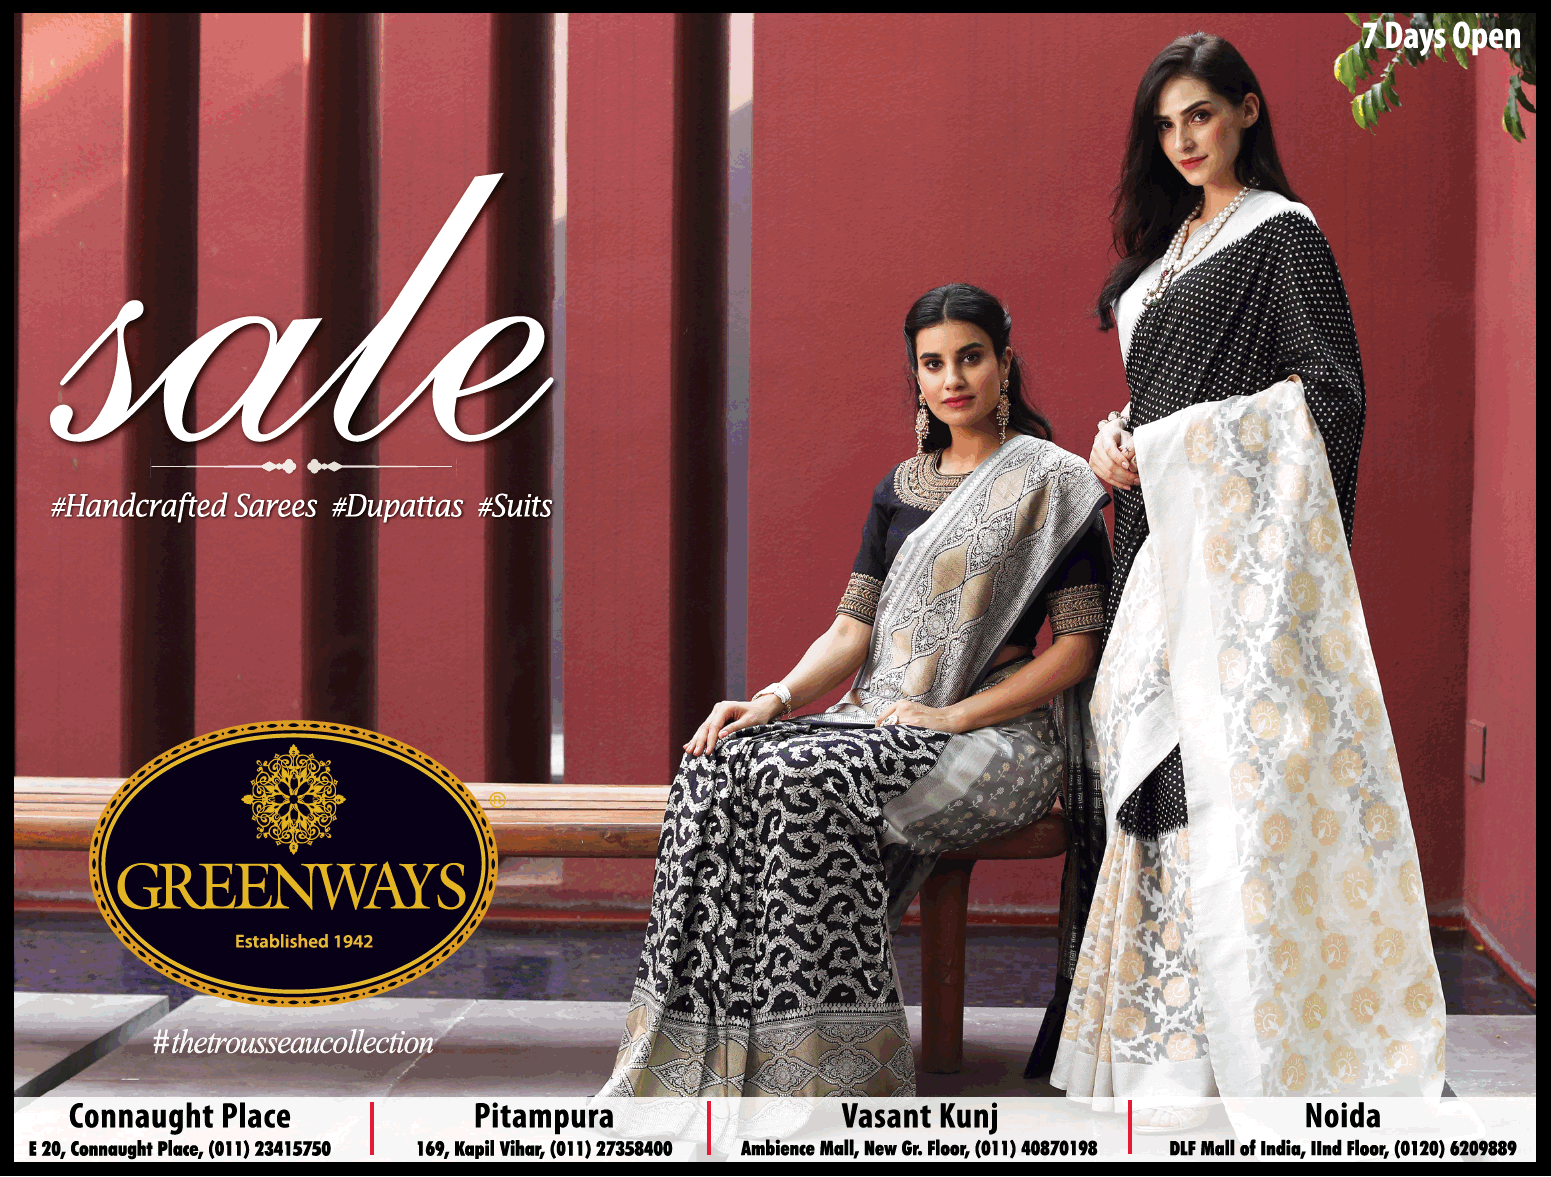 greenways-sale-7-days-open-ad-delhi-times-03-08-2019.png